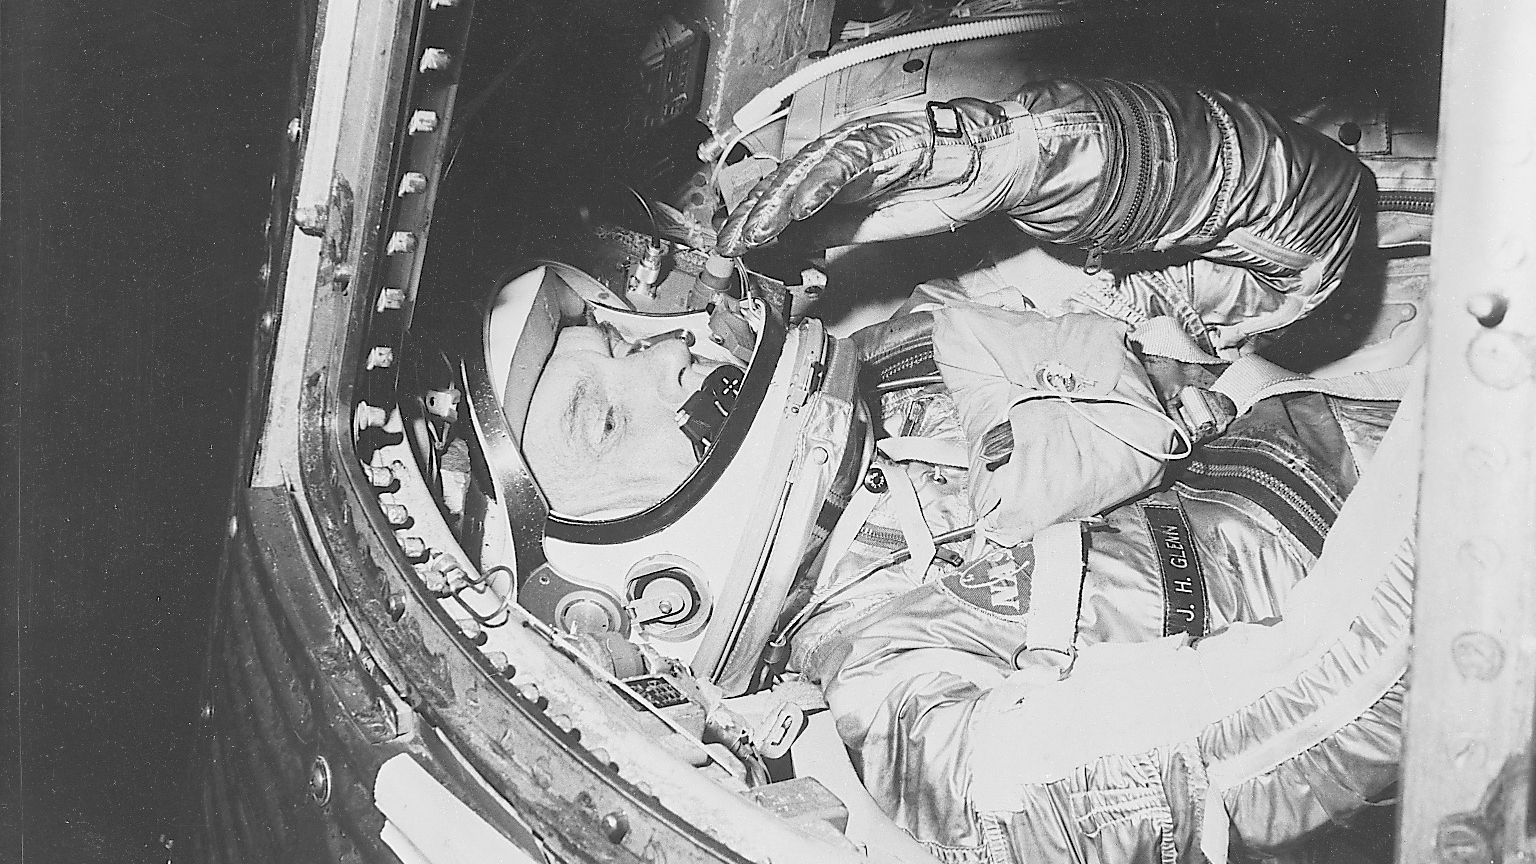 John Glenn, aboard the Friendship 7, became the first American to orbit the Earth on February 20, 1962. He also set a record as the oldest astronaut in space when, at the age of 77, he went on a  mission aboard the Space Shuttle Discovery in 1996.